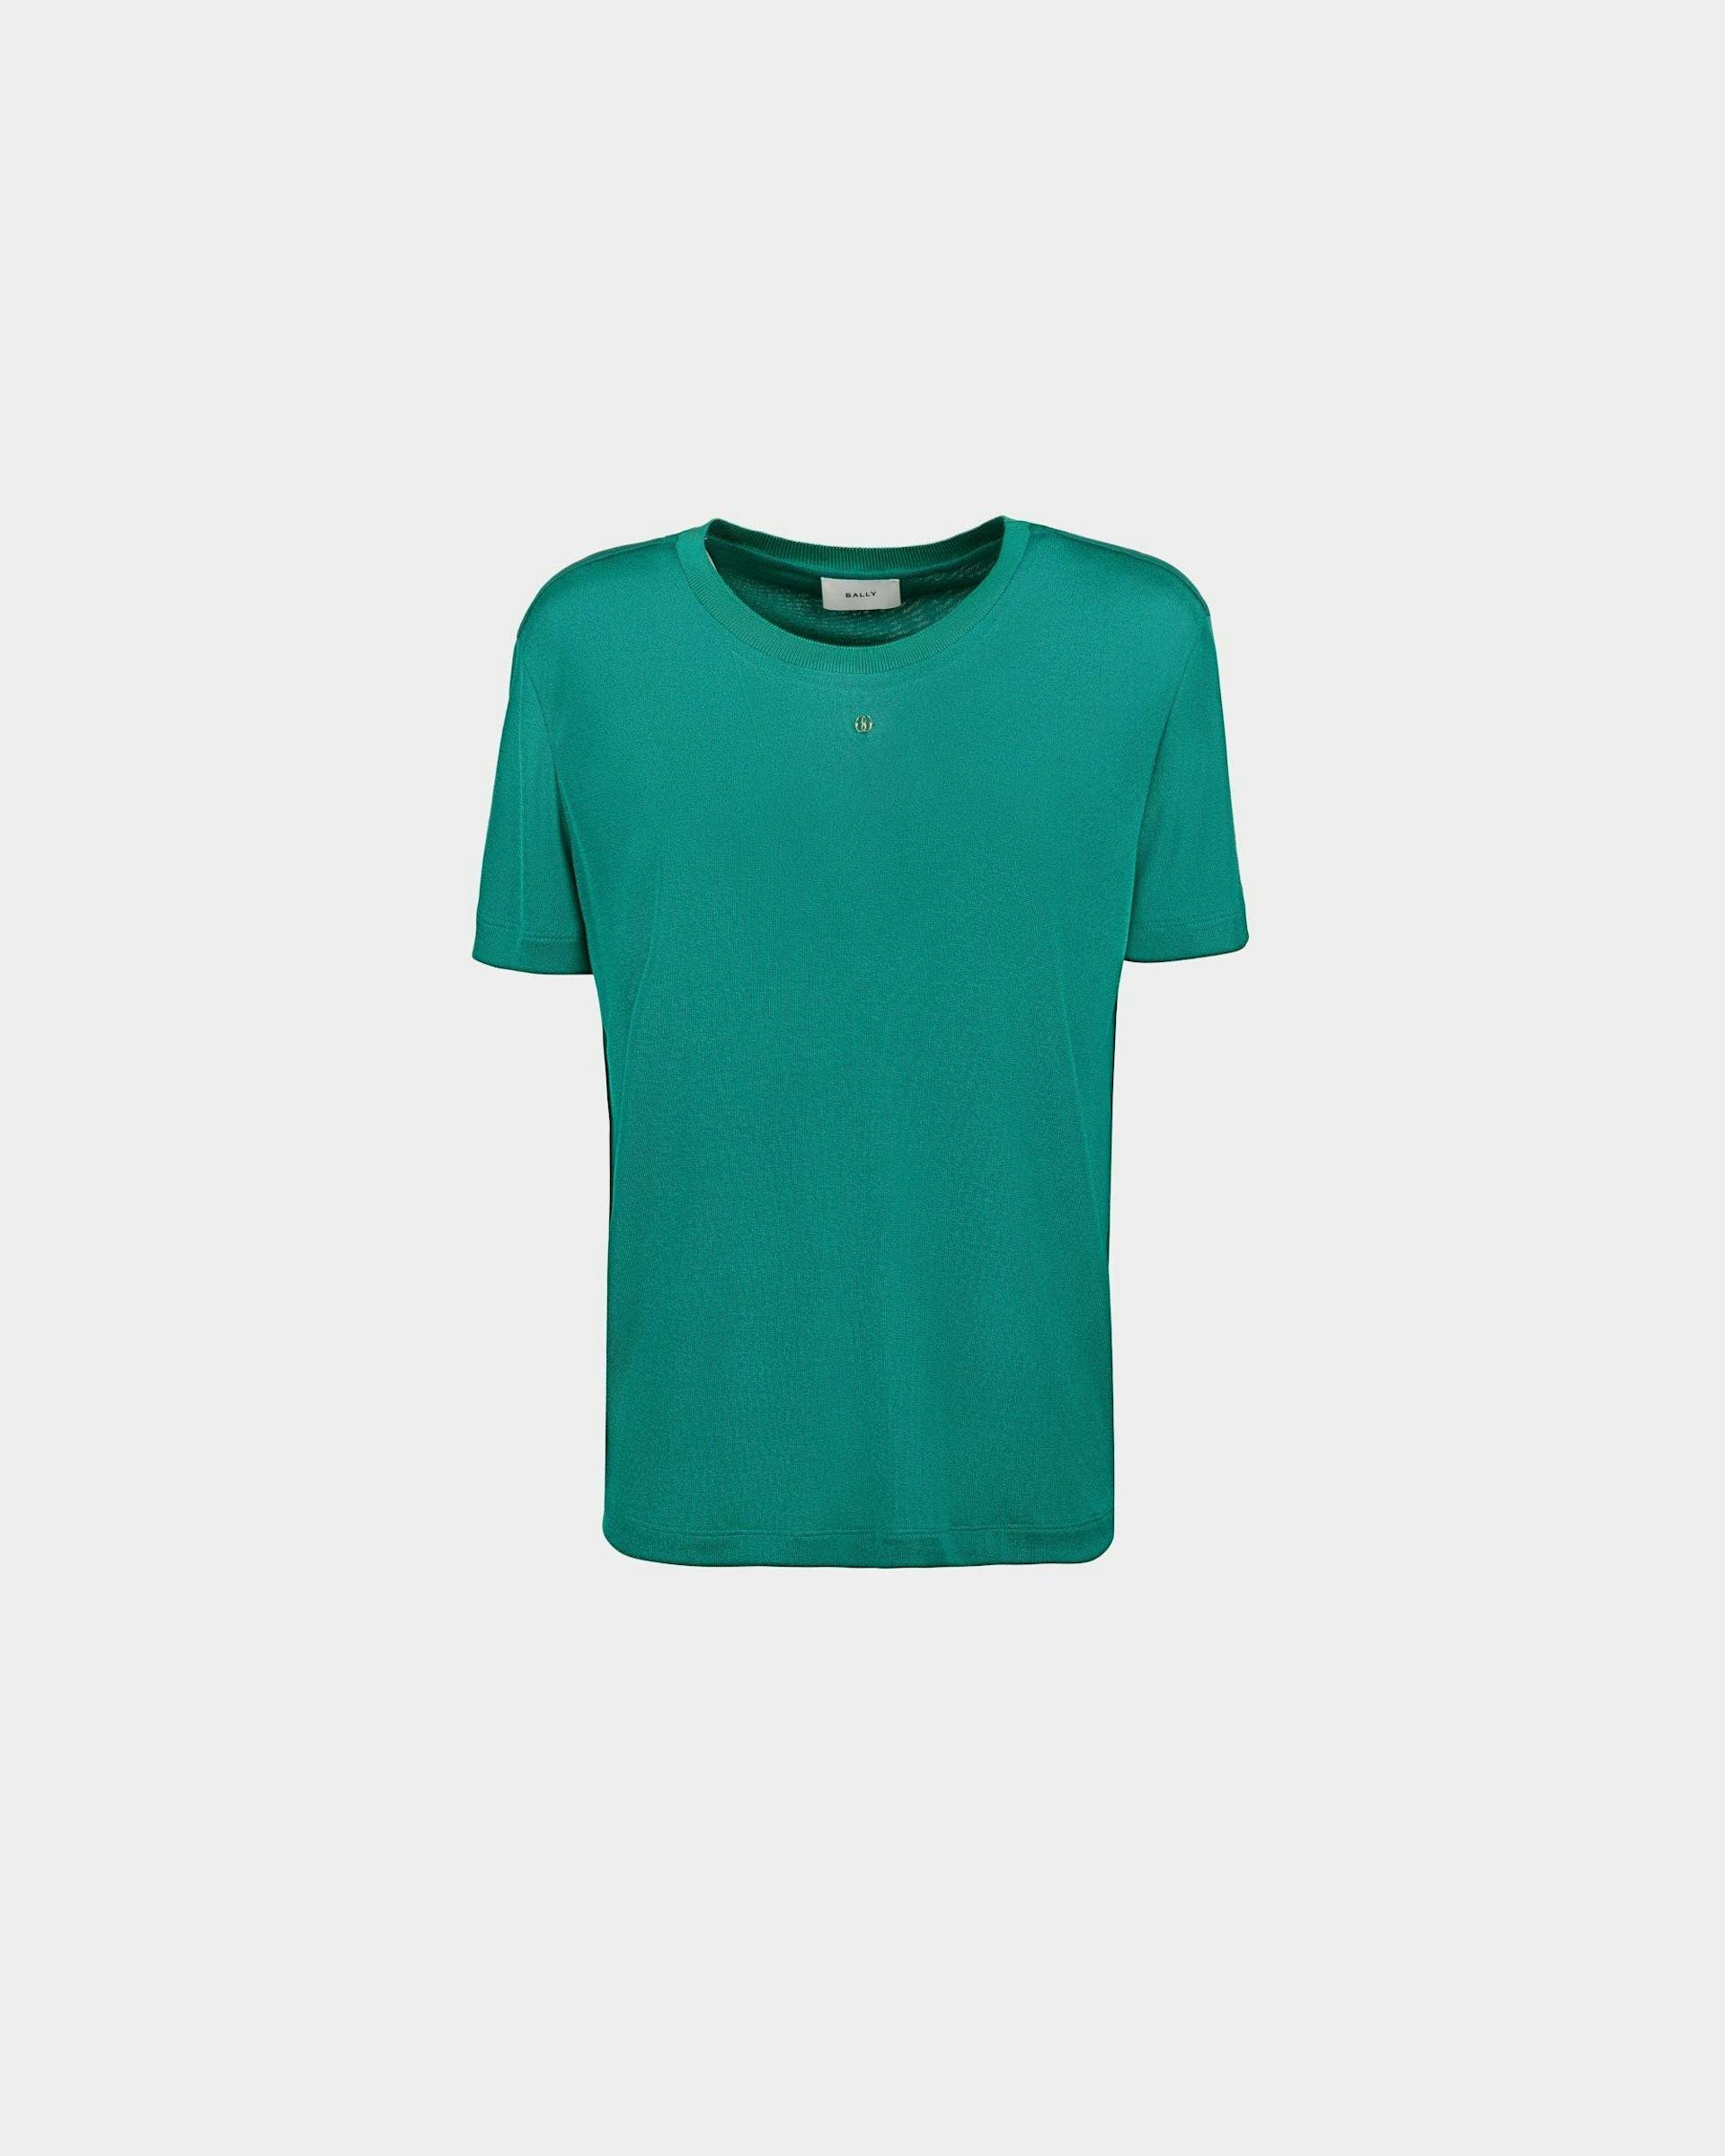 Women's Top in Jersey | Bally | Still Life Front